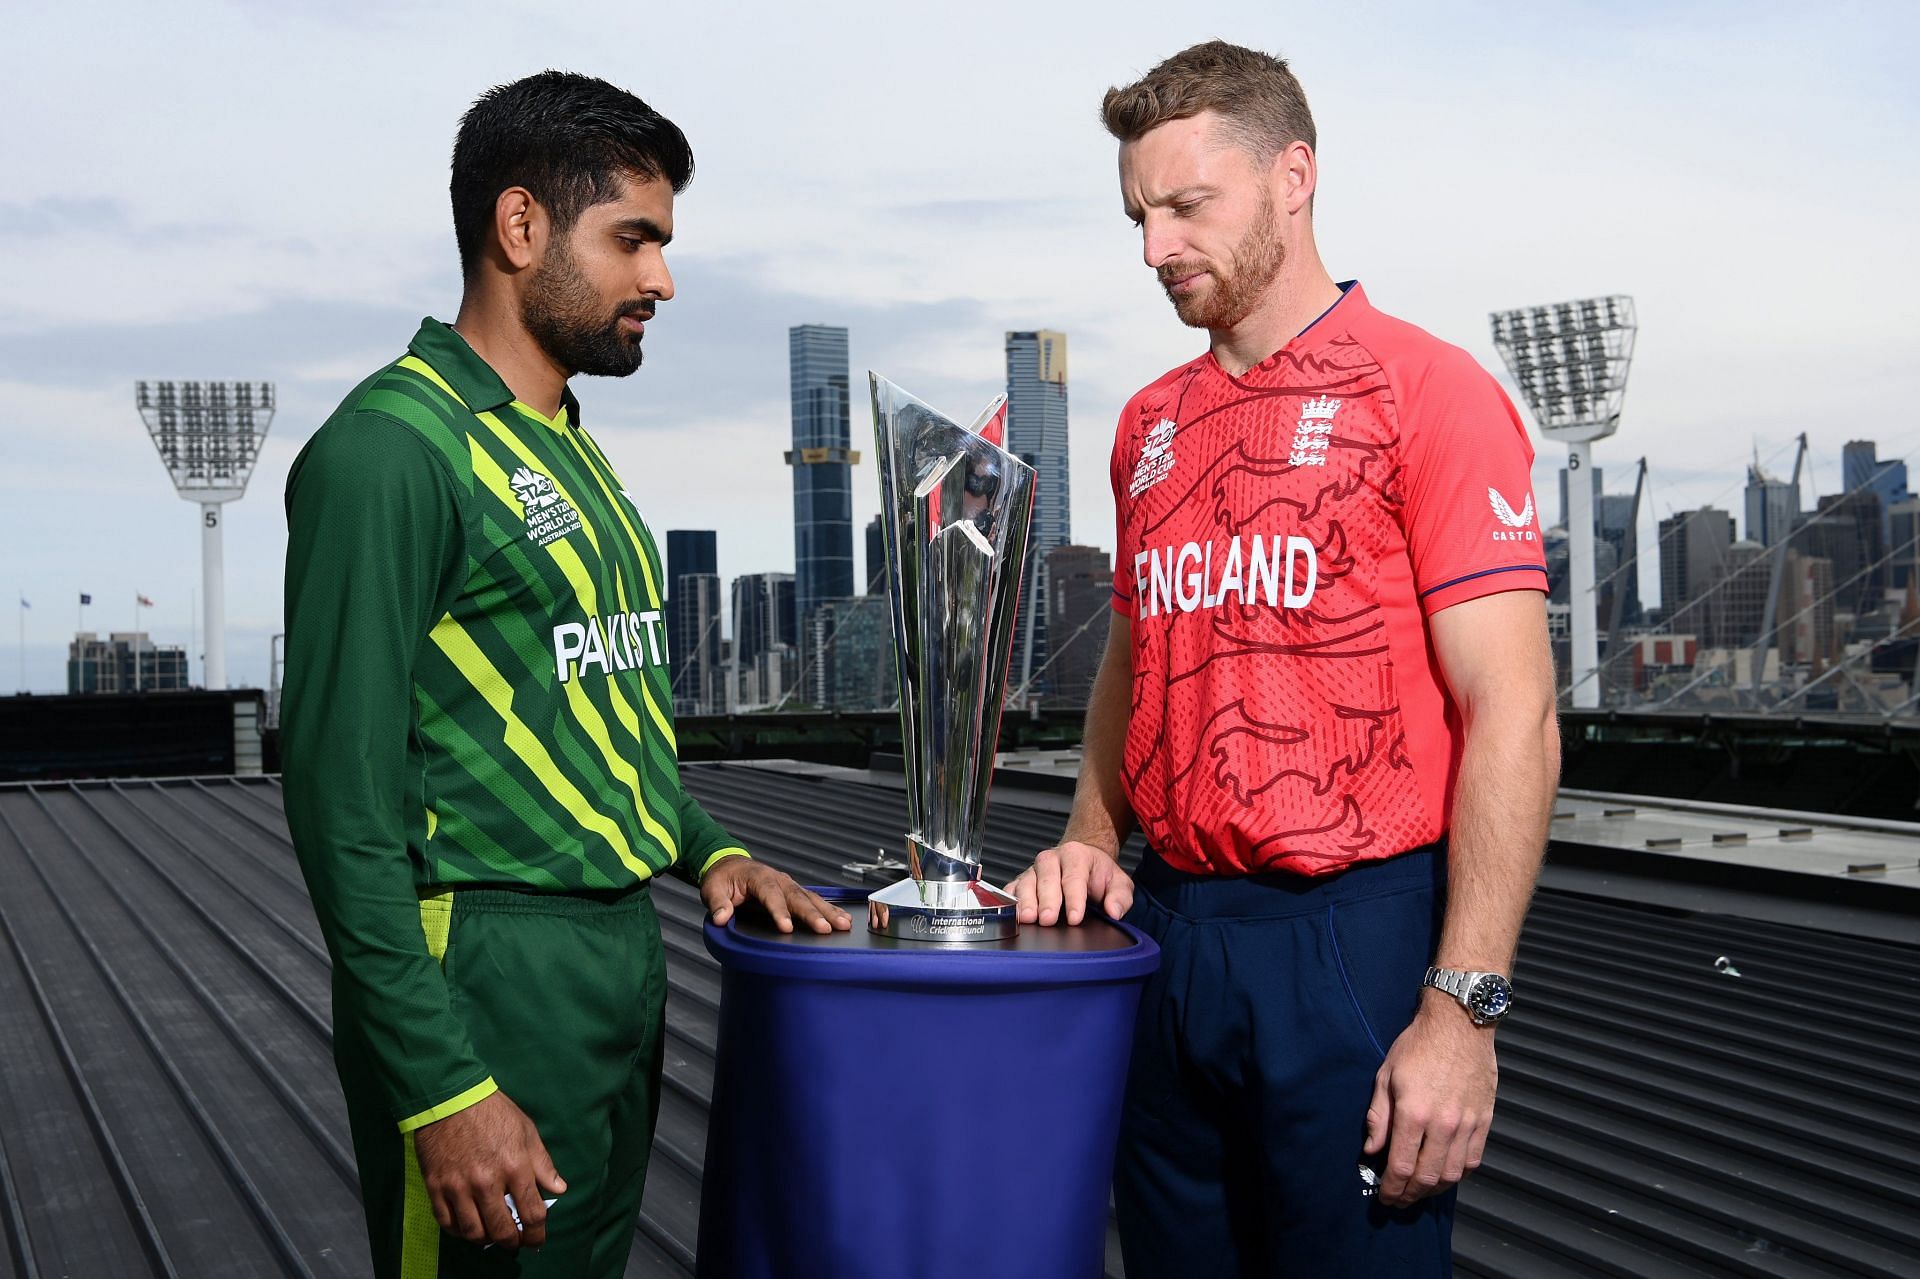 Babar Azam and Jos Buttler. (Image Credits: Getty)